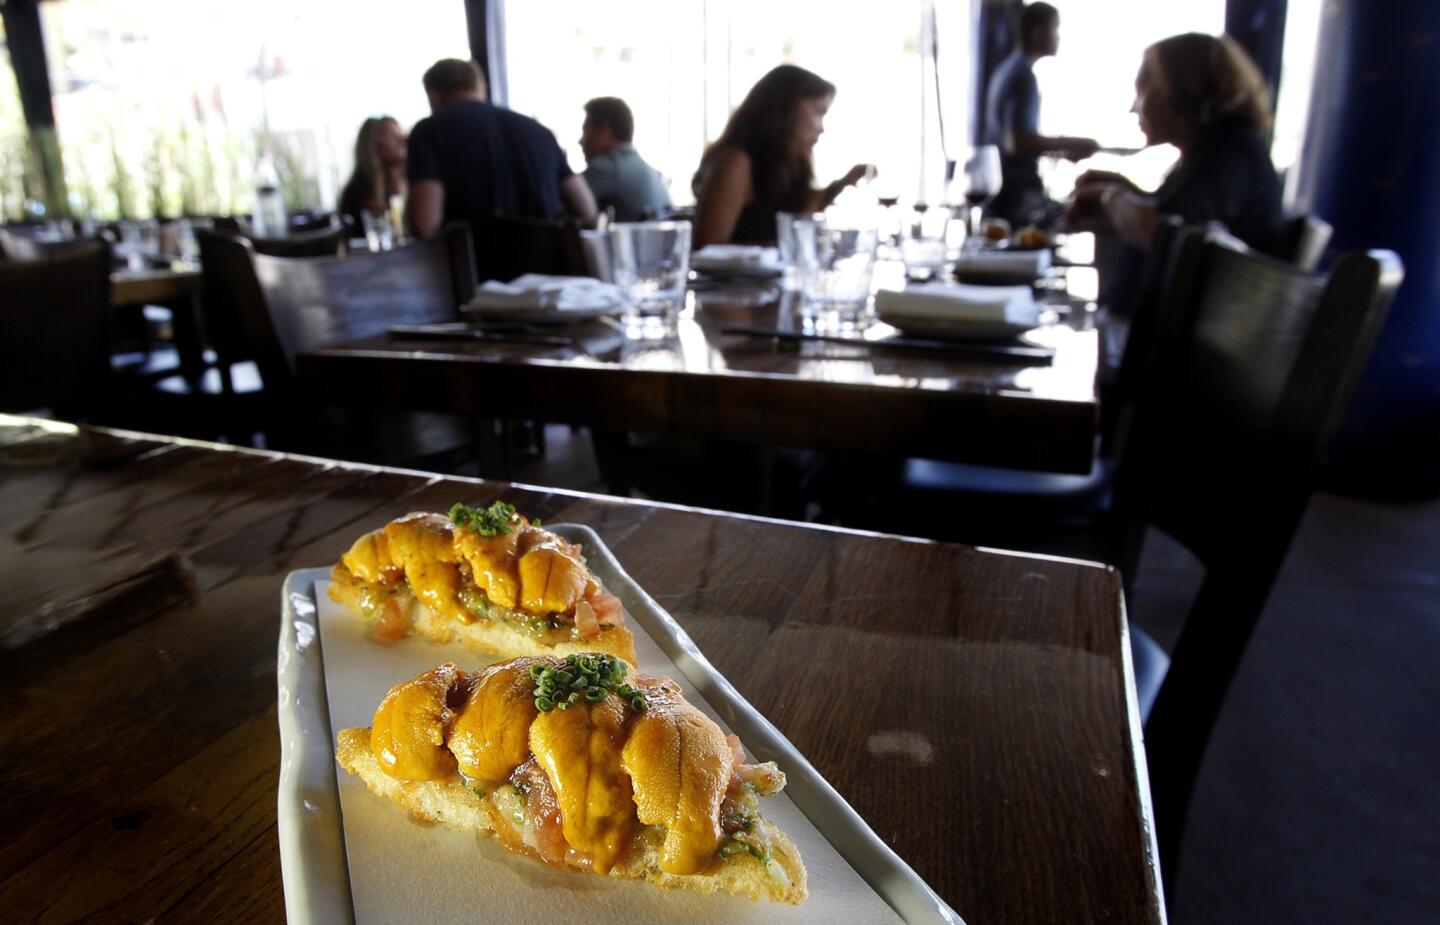 Uni shrimp toast made with sea urchin, shrimp paste and rocoto honey sauce is offered at Paiche in Marina Del Rey.